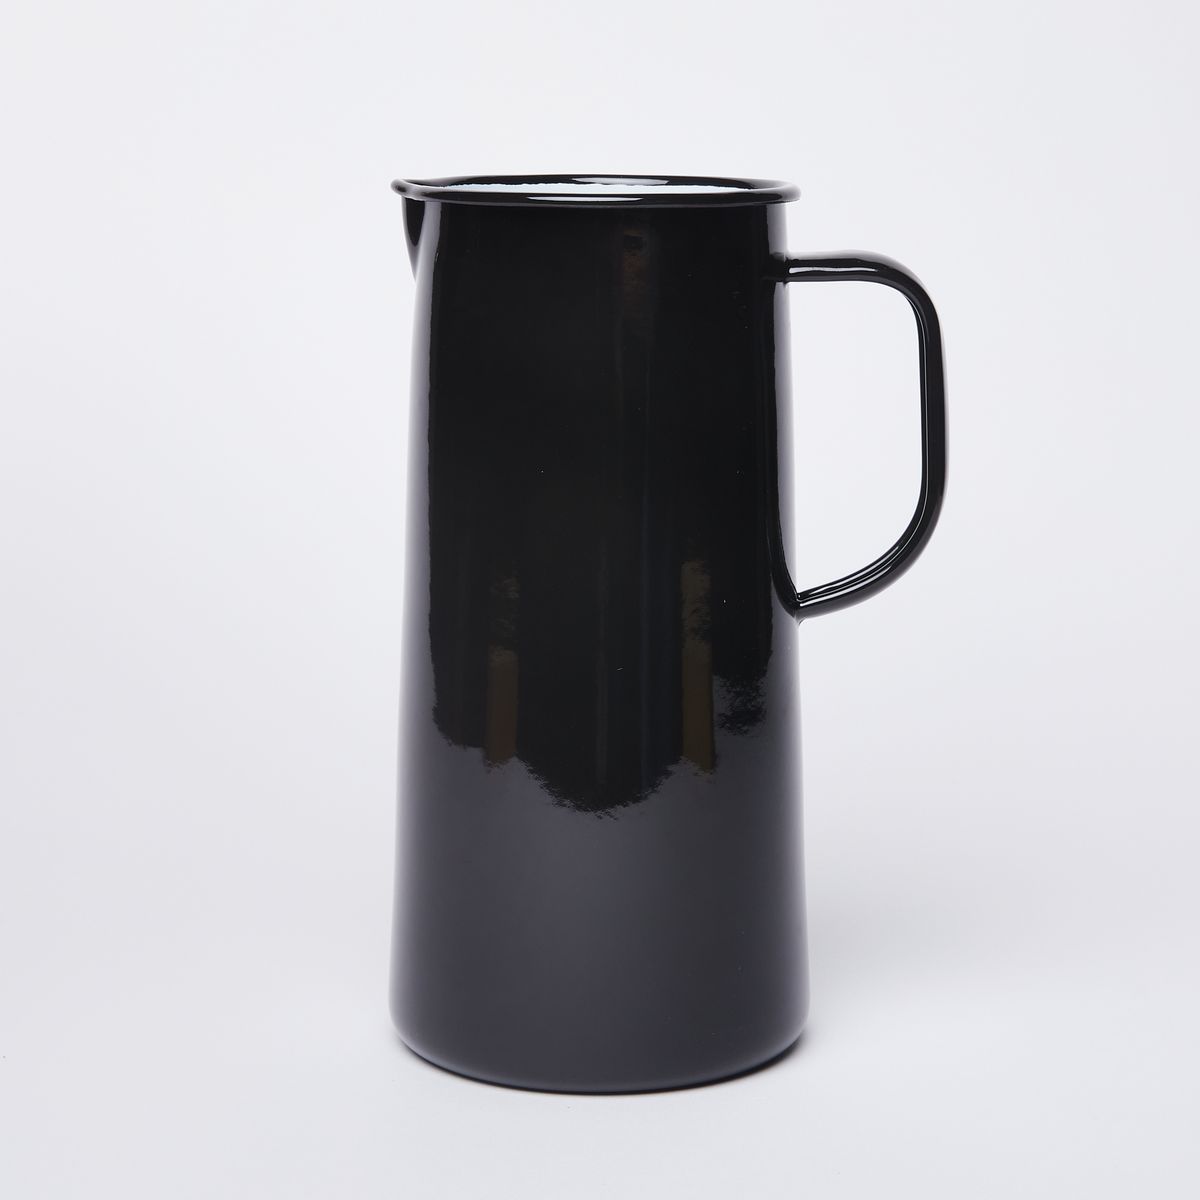 Shiny black cylindrical jug, with white interior, a spout on the left, and a handle on the right